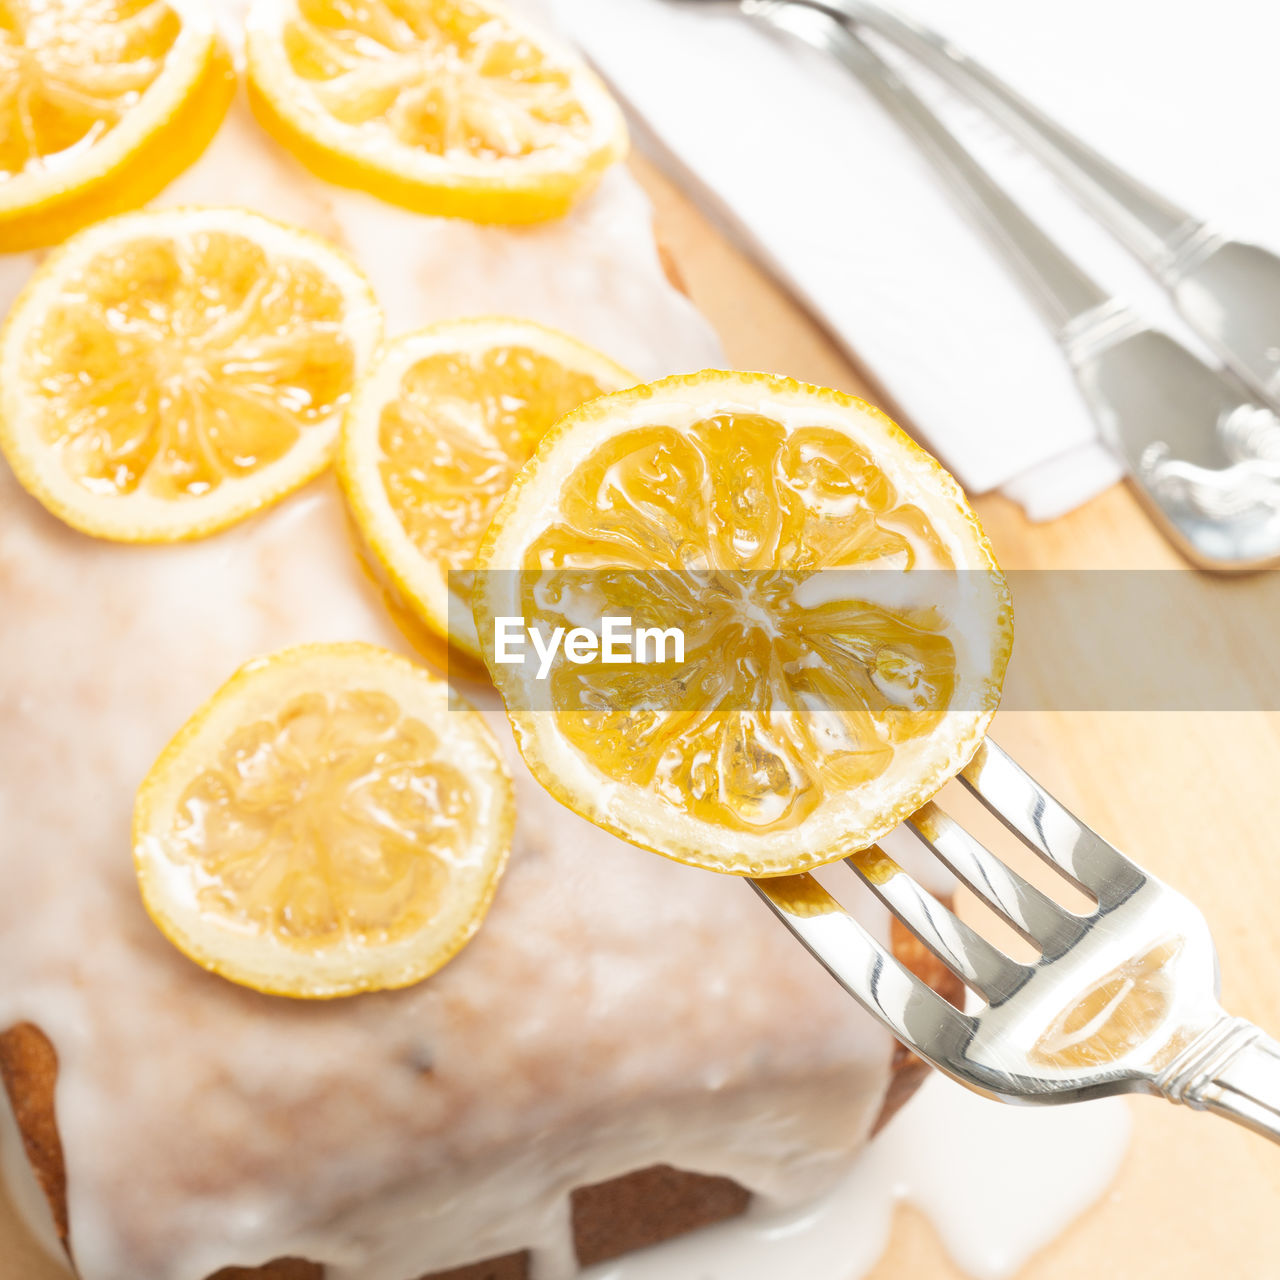 Delicious lemon cake topped with snowy lemon and candied lemon slices